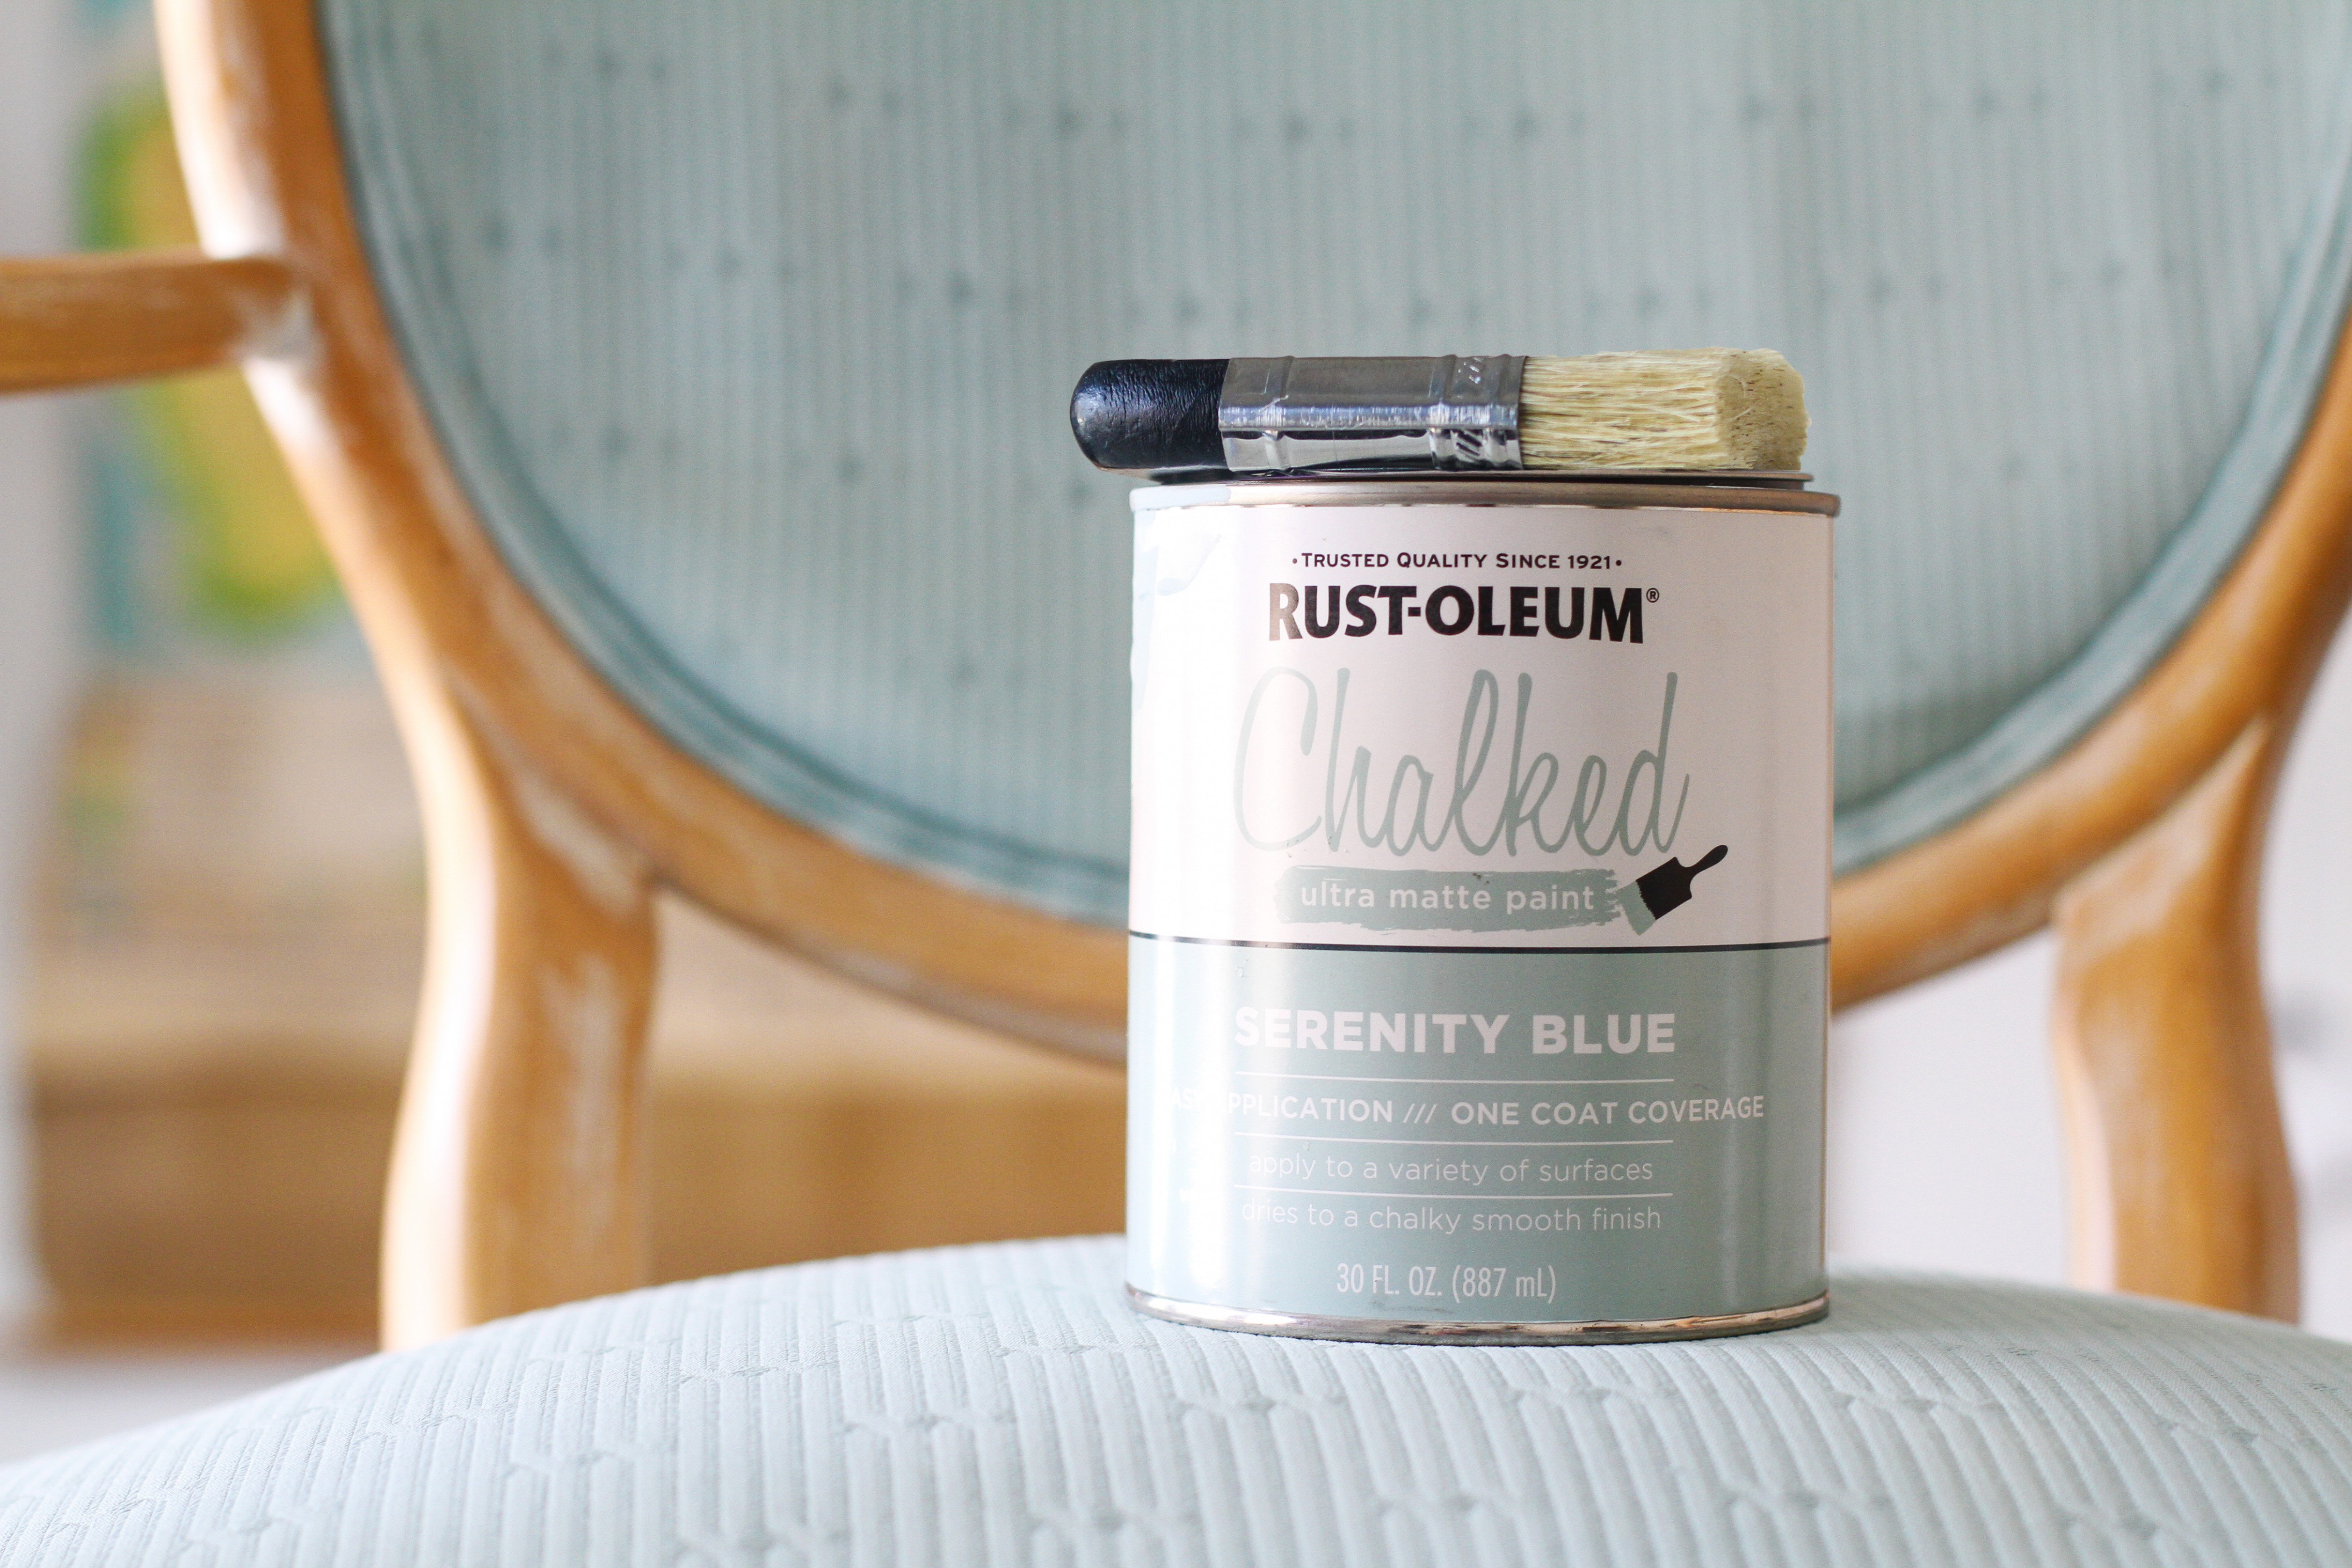 Chalk Paint Painted Upholstery Fabric Furniture | Apartment Therapy Painting Over Chalk Paint That Has Been Waxed